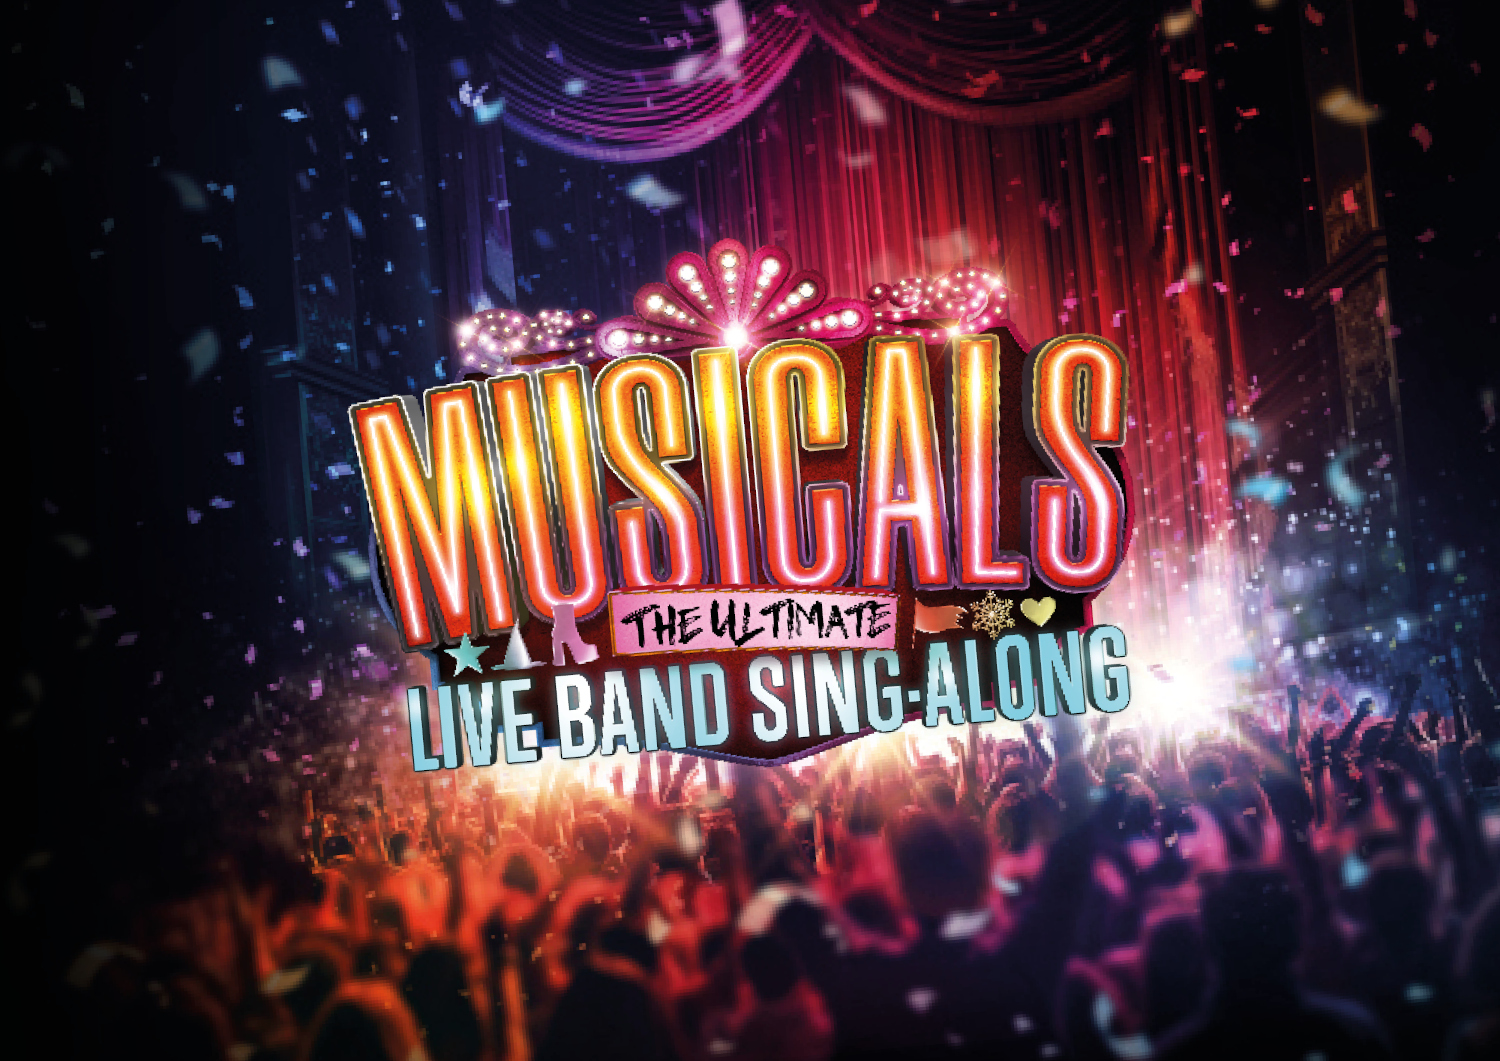 Musicals – The Ultimate Live Band Sing-Along